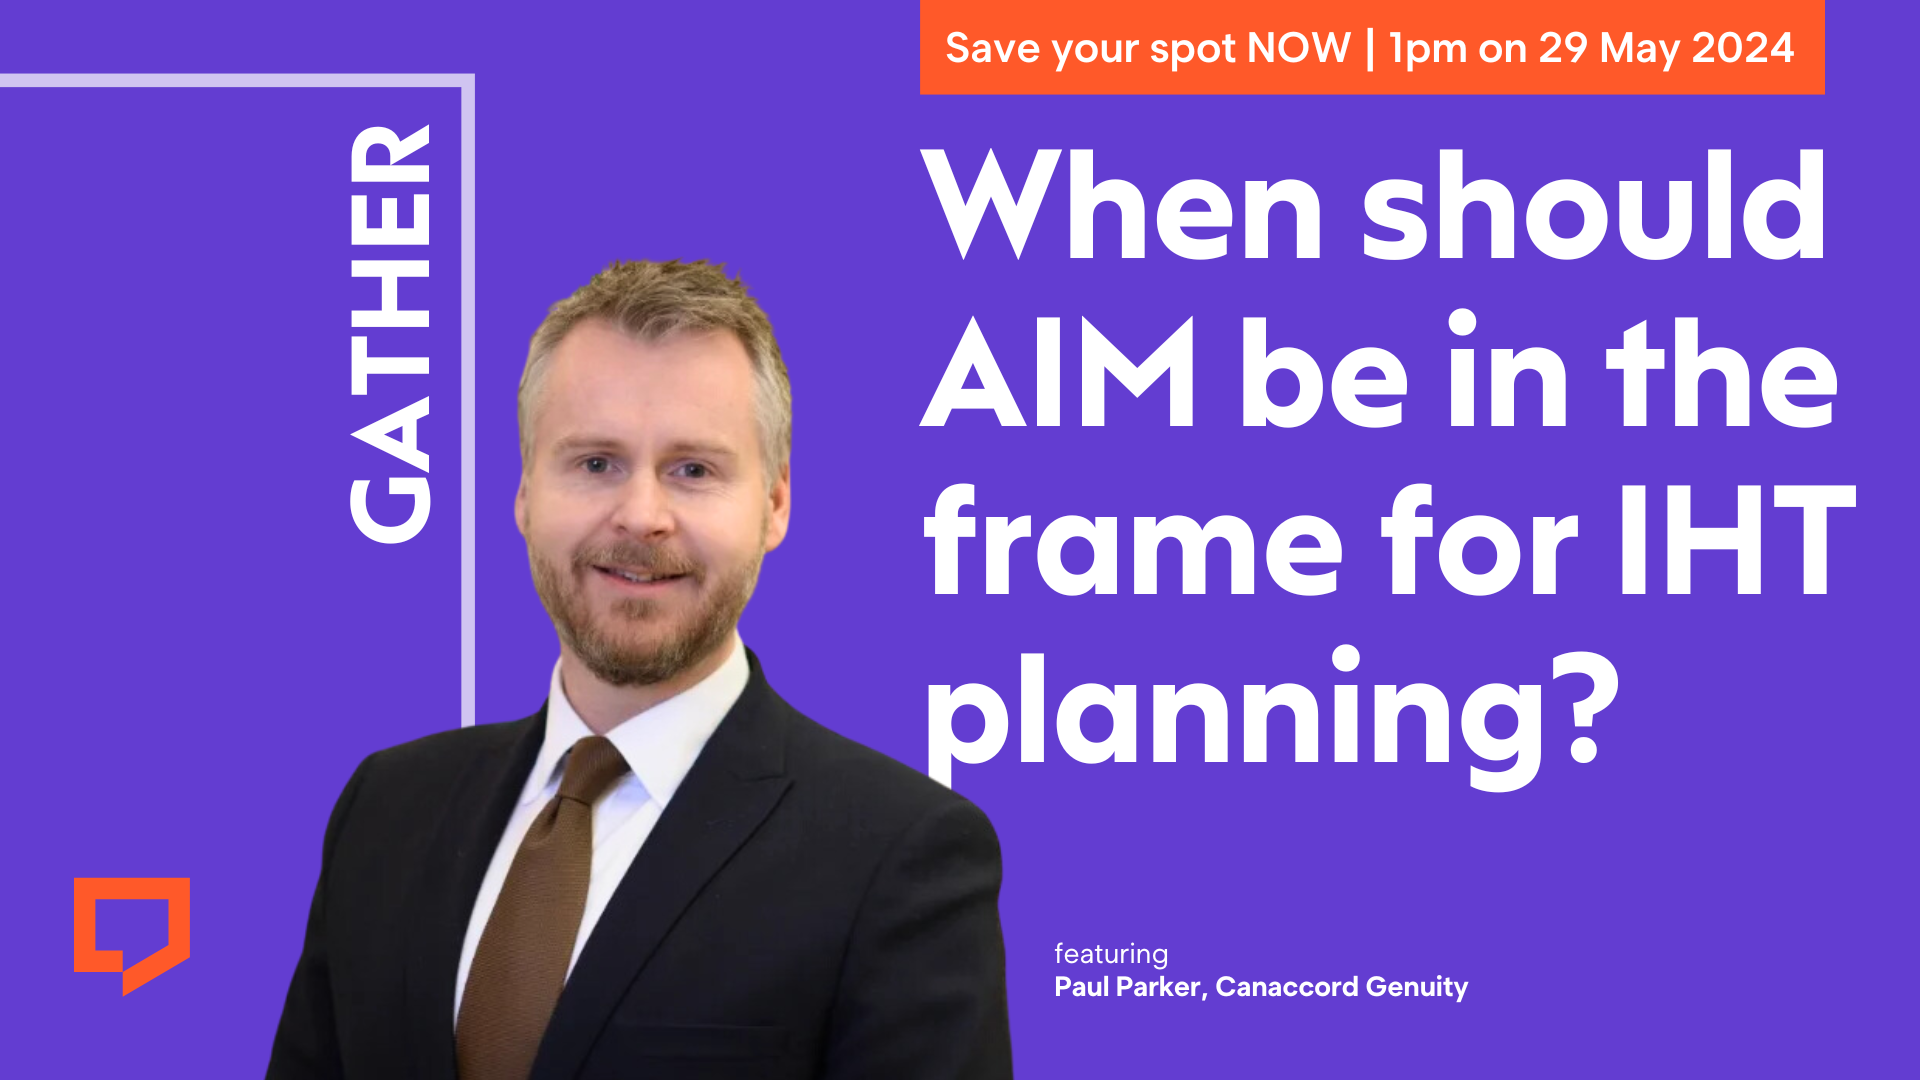 Save your spot now. 1pm on 29 May 2024. 'When should AIM be in the frame for IHT planning?' featuring Paul Parker of Canaccord Genuity